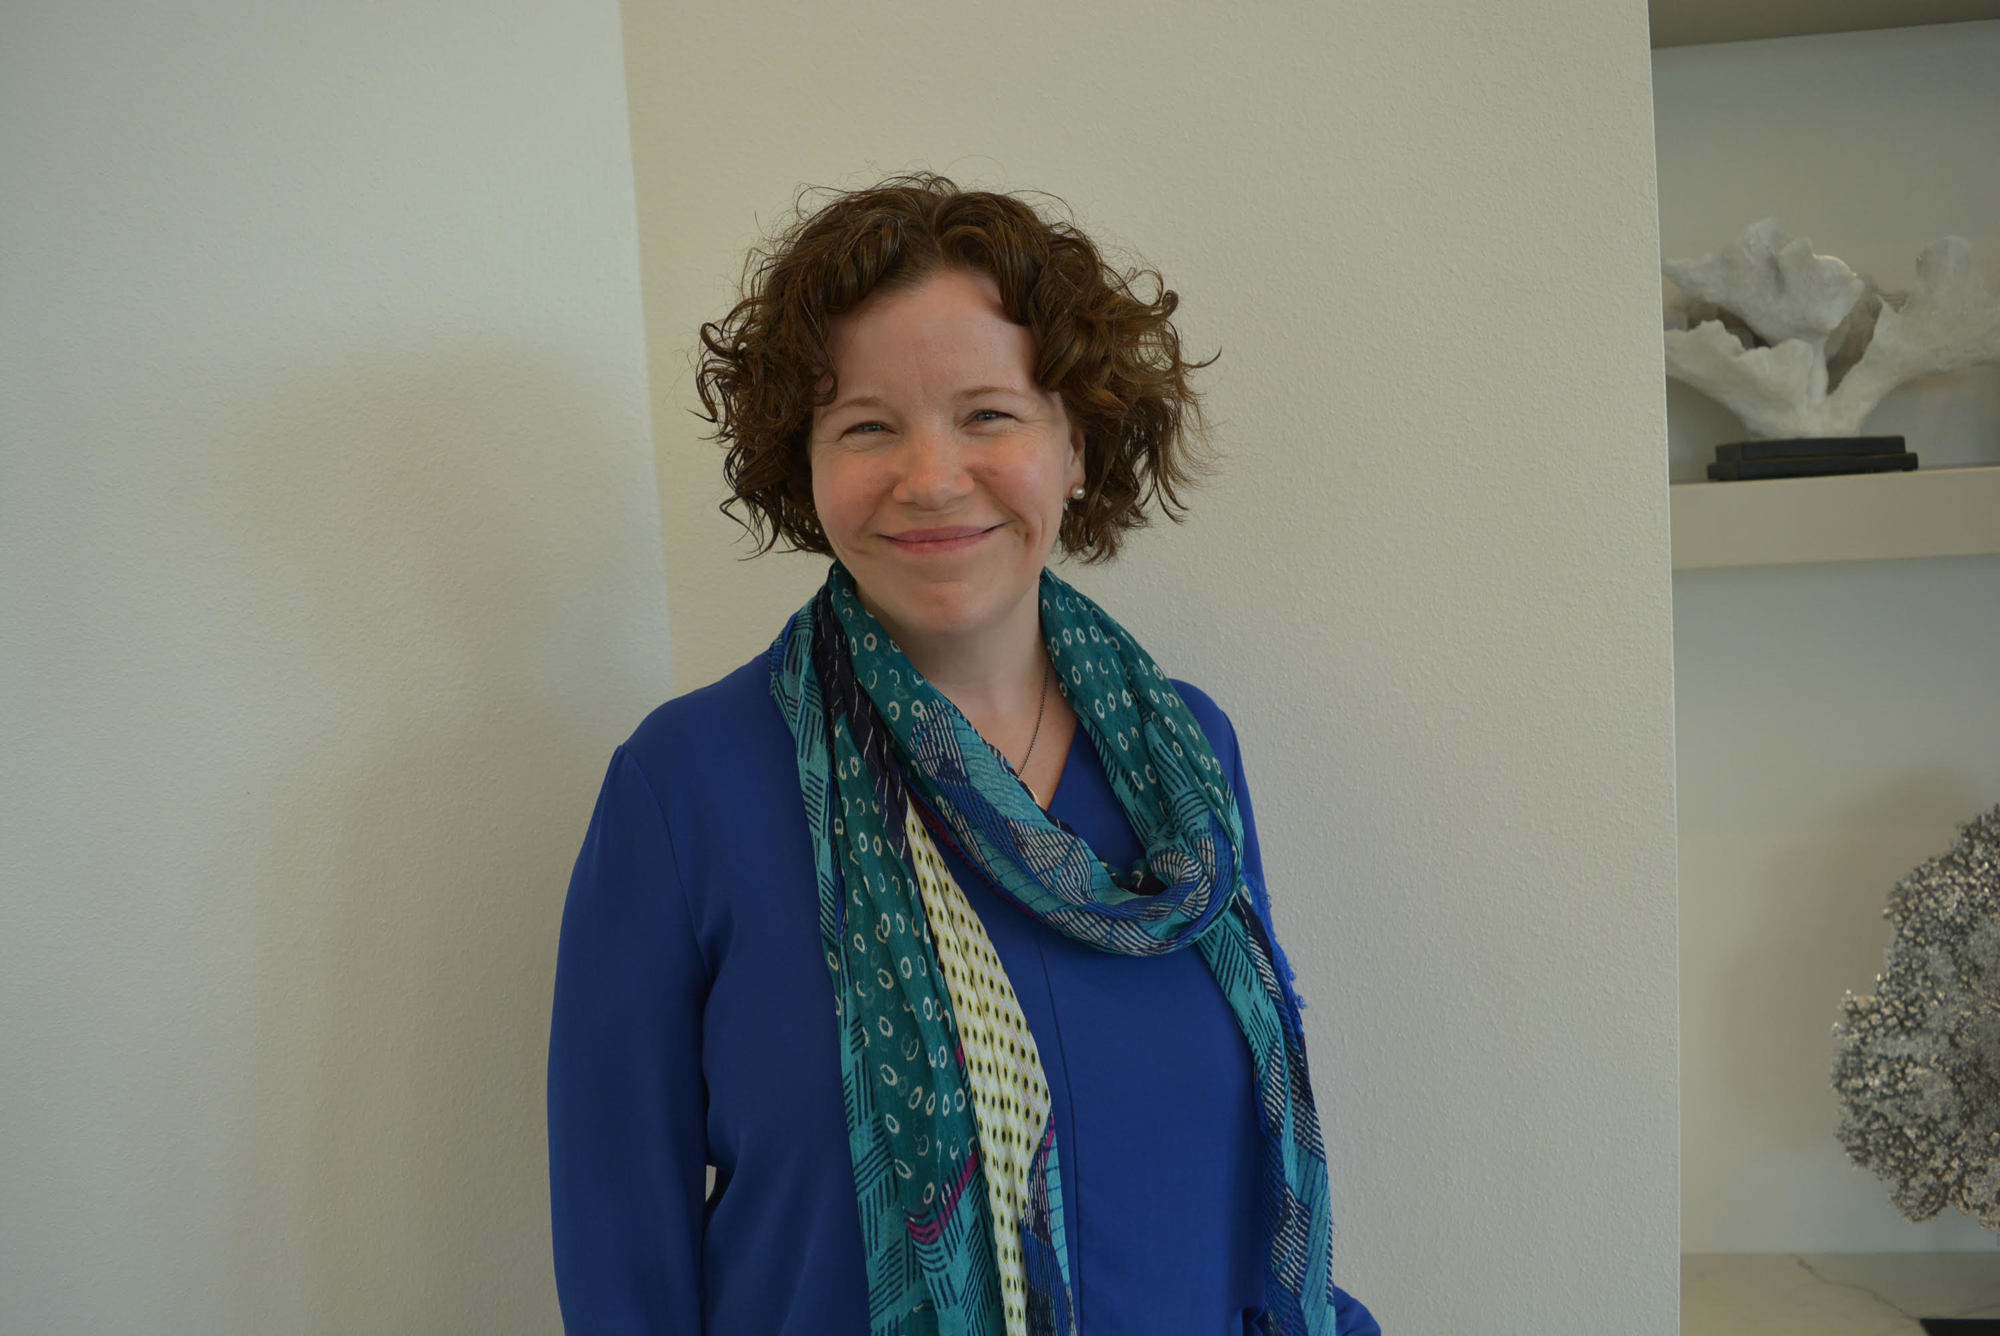 Erin Dunn is a social and psychiatric epidemiologist with expertise in genetics and epigenetics.